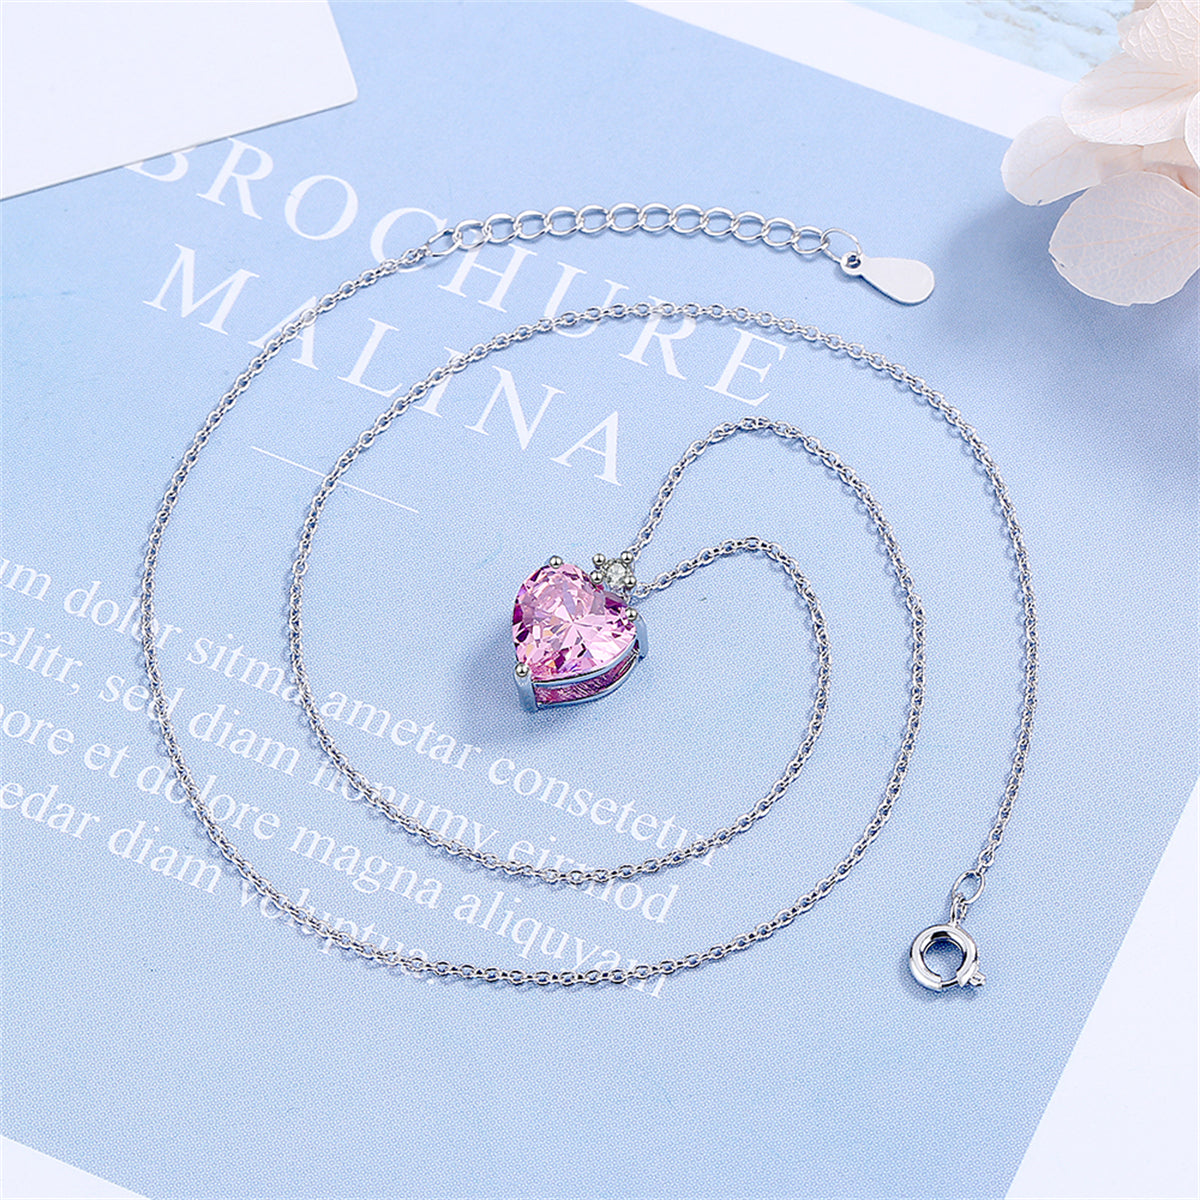 Pink Crystal & Cubic Zirconia Heart Pendant Necklace